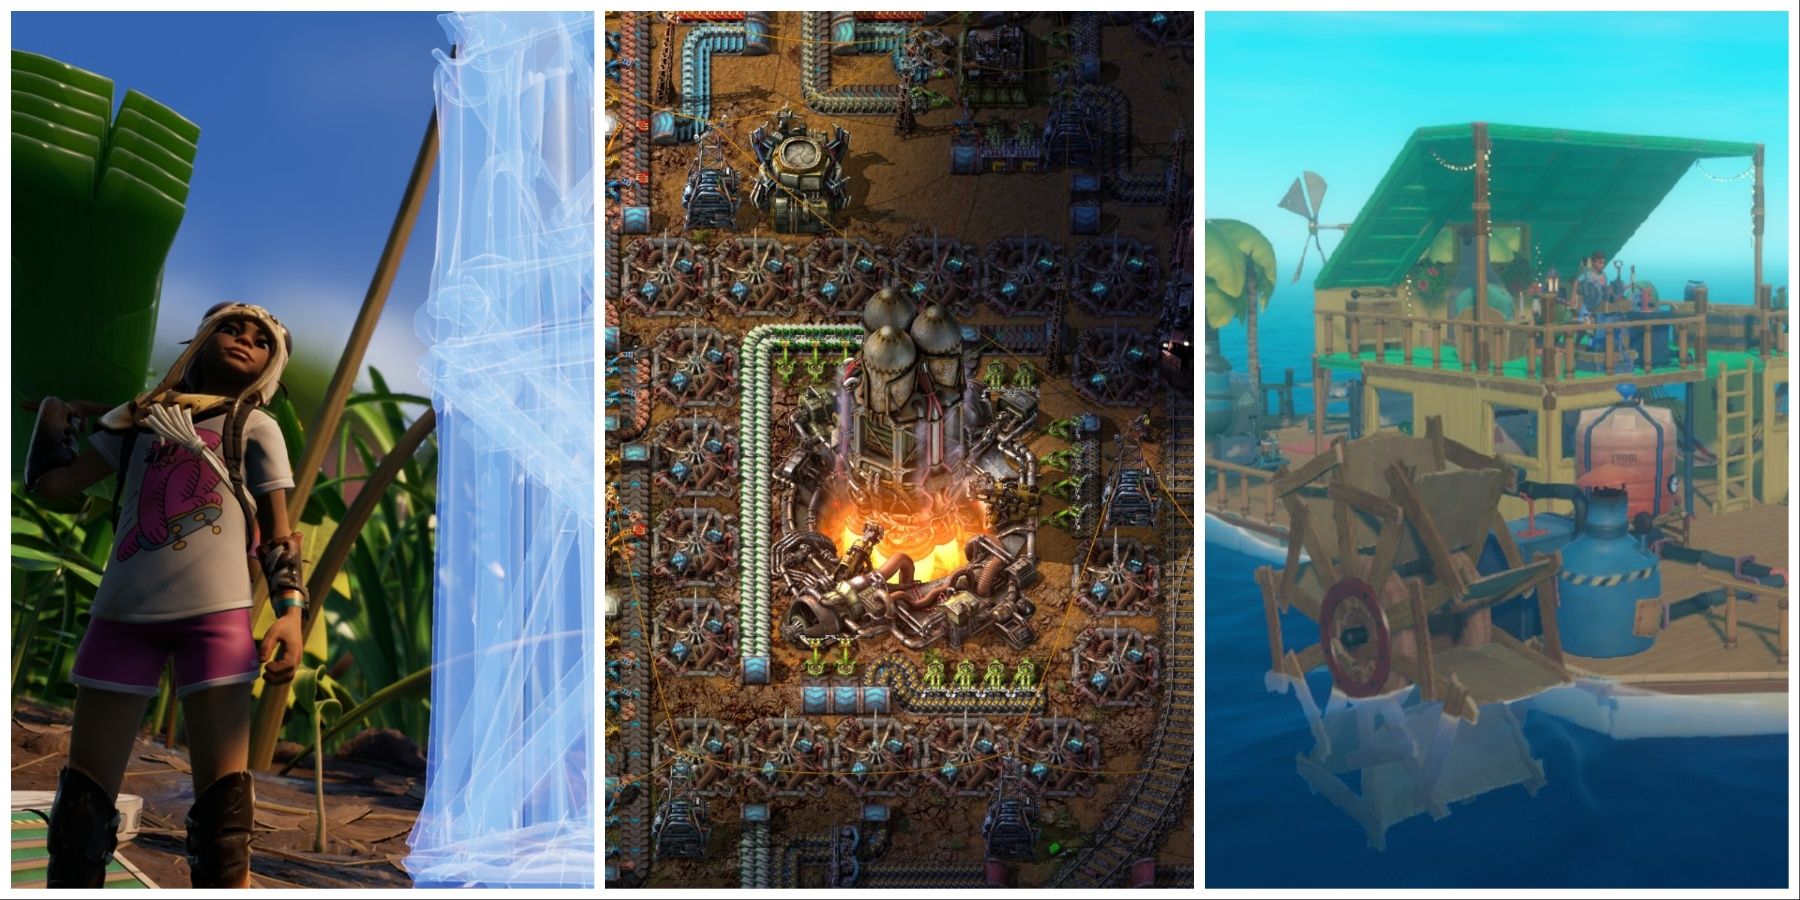 Featured image of base building games with co-op including Grounded, Factorio, and Raft